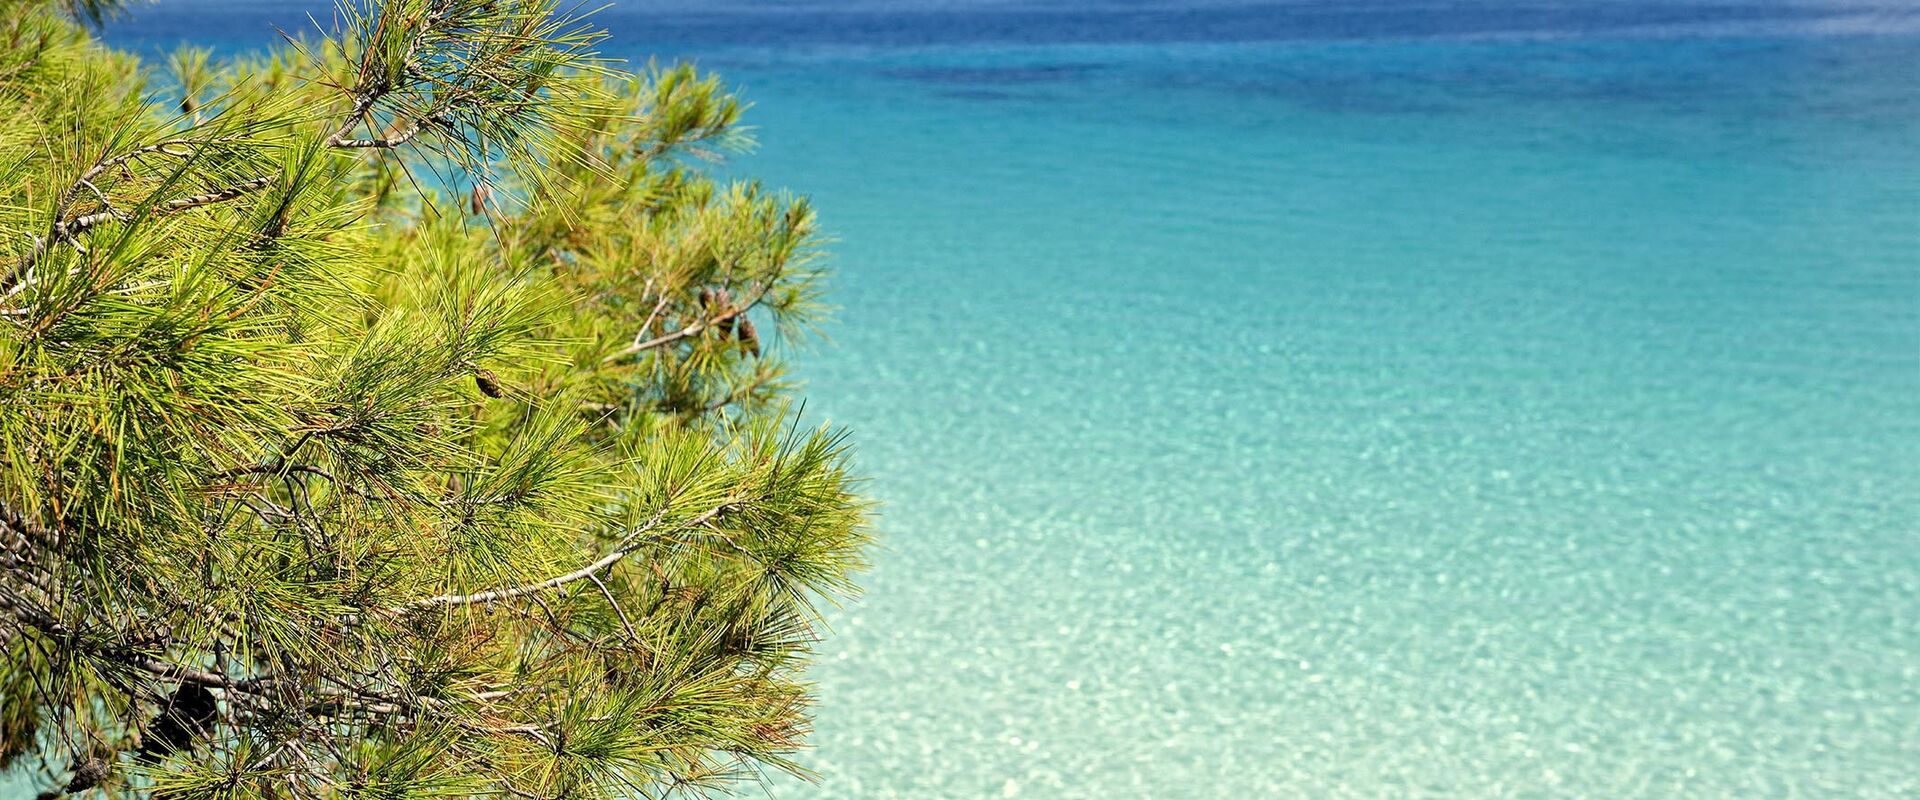 Pines and sea in perfect harmony in Halkidiki